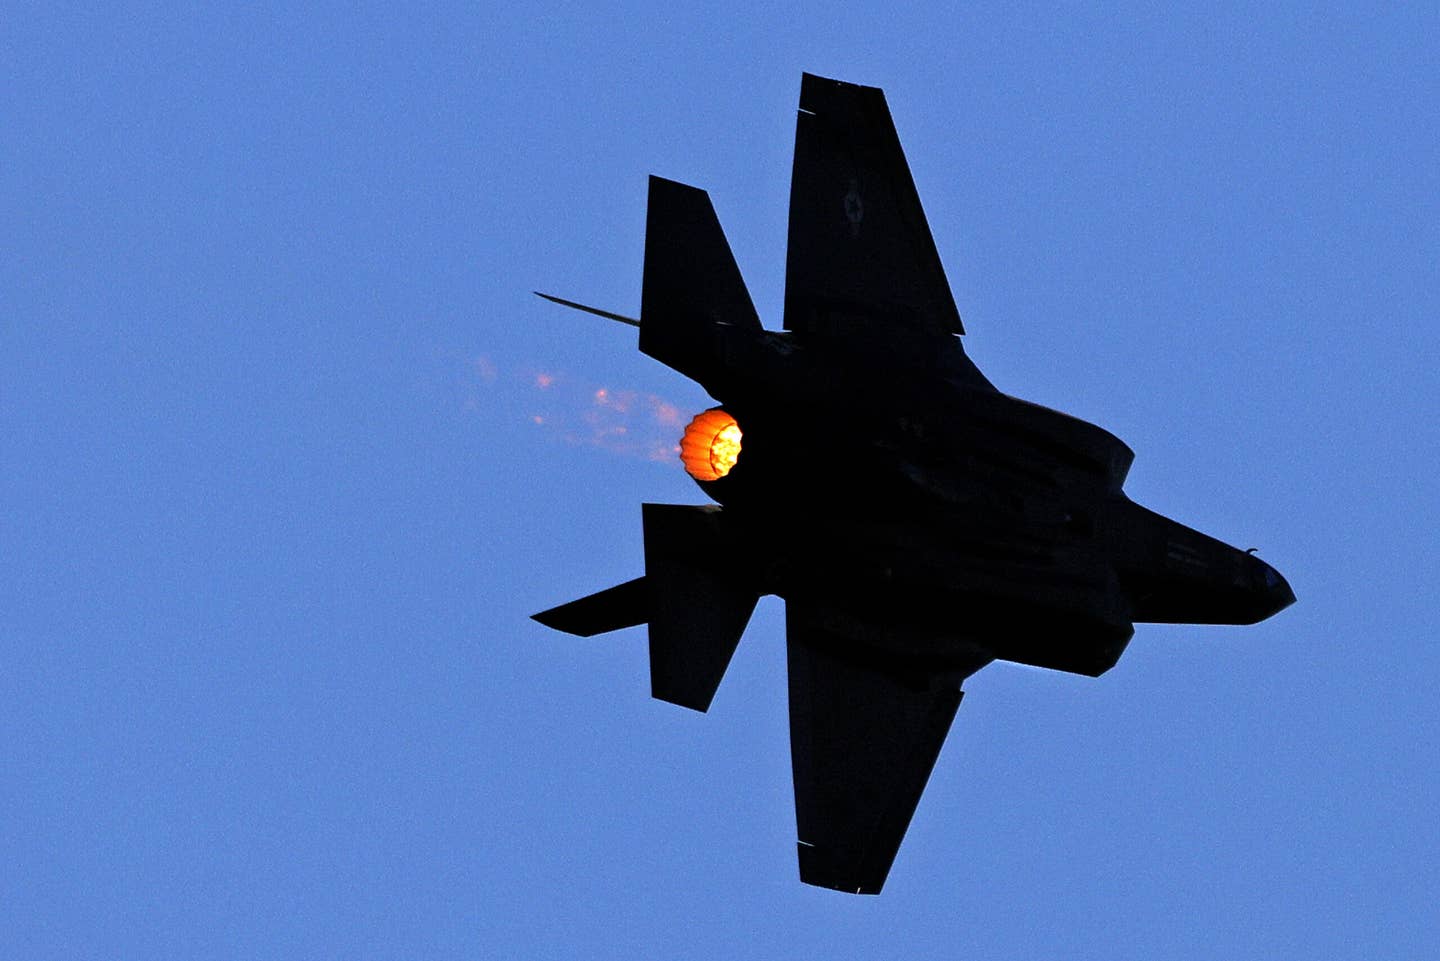 A U.S. Air Force F-35A Lighting performs during the Pacific Airshow on Oct. 1, 2021 in Huntington Beach, California. (Photo by Michael Heiman/Getty Images)